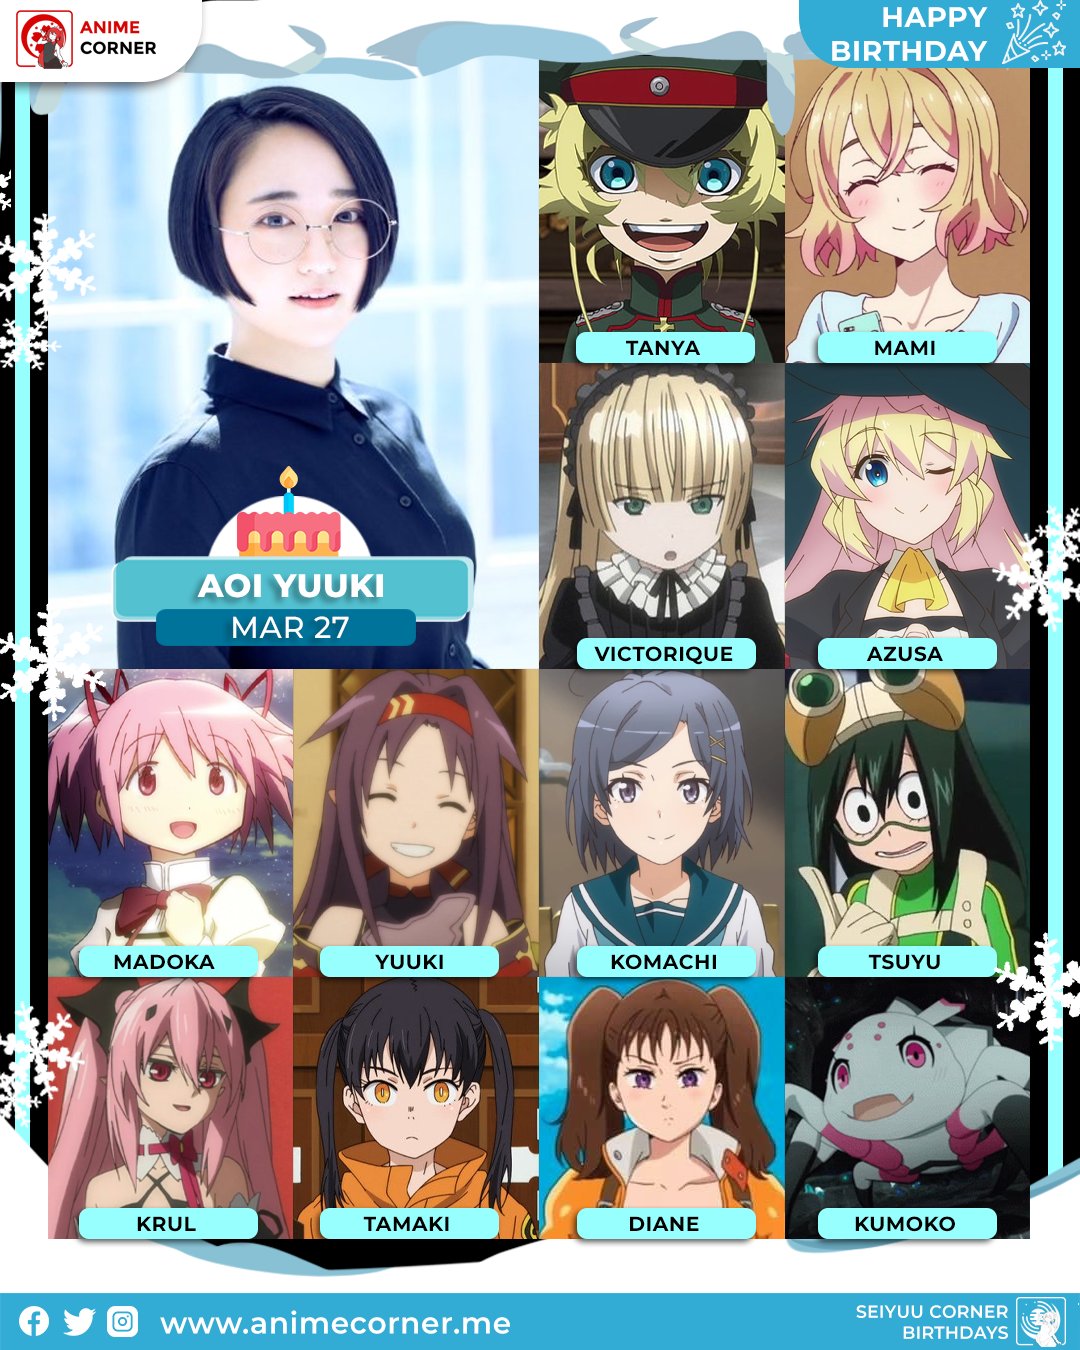 Anime Corner on Twitter: "Happy 30th Birthday Aoi Yuuki! 🥳 Ao-chan is  known for voicing Mami Nanami from Rent a Girlfriend, Tanya Degurechaff  from Saga of Tanya the Evil, Madoka Kaname from